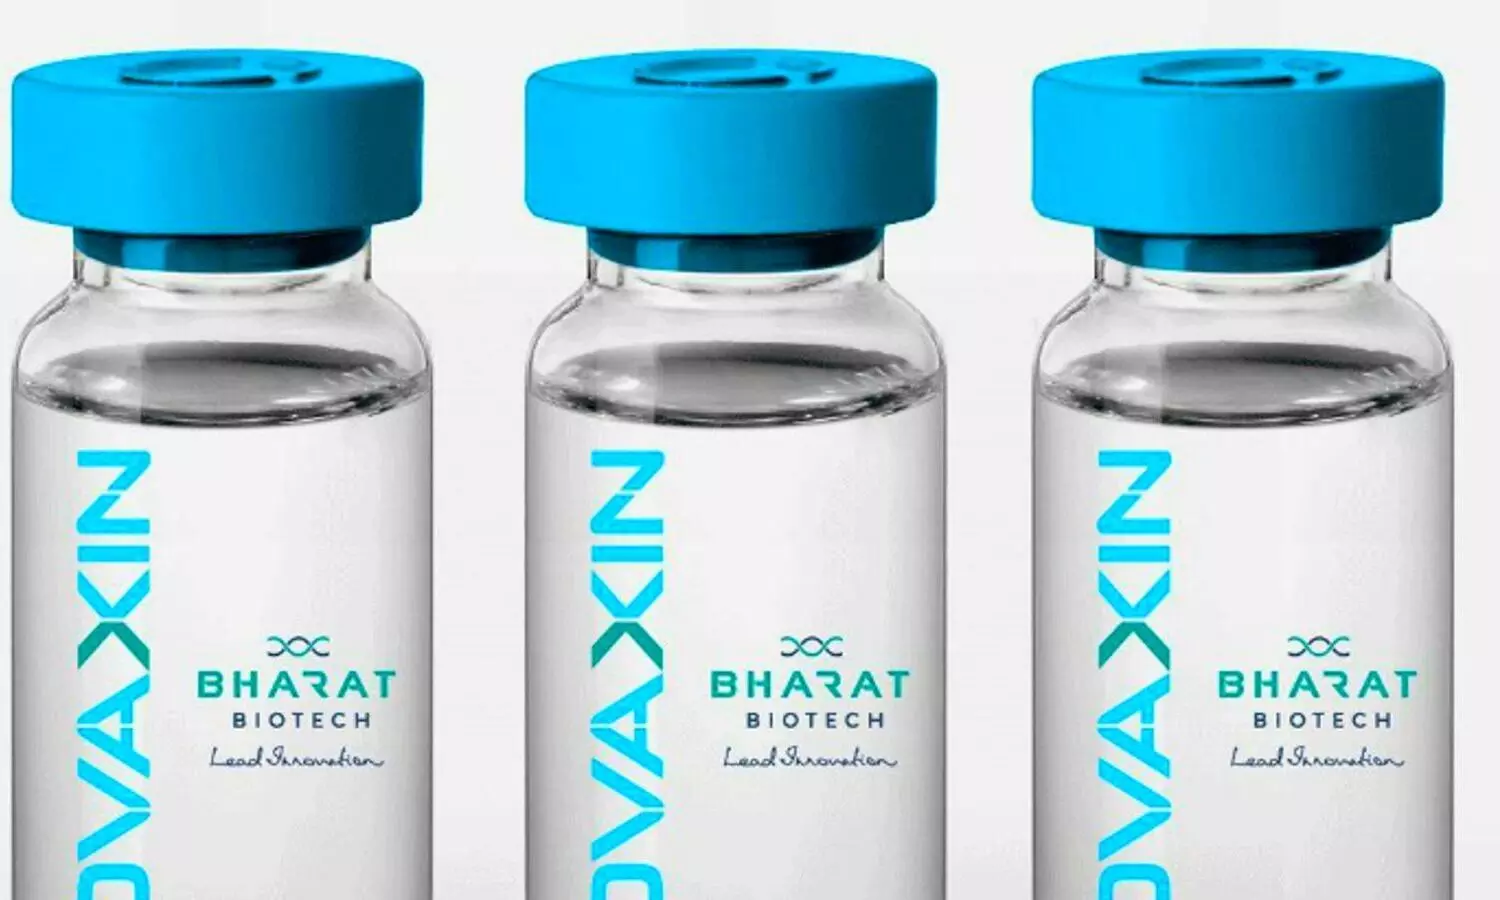 Proud Moment for India: Bharat Biotech Covaxin gets WHO approval for emergency use listing